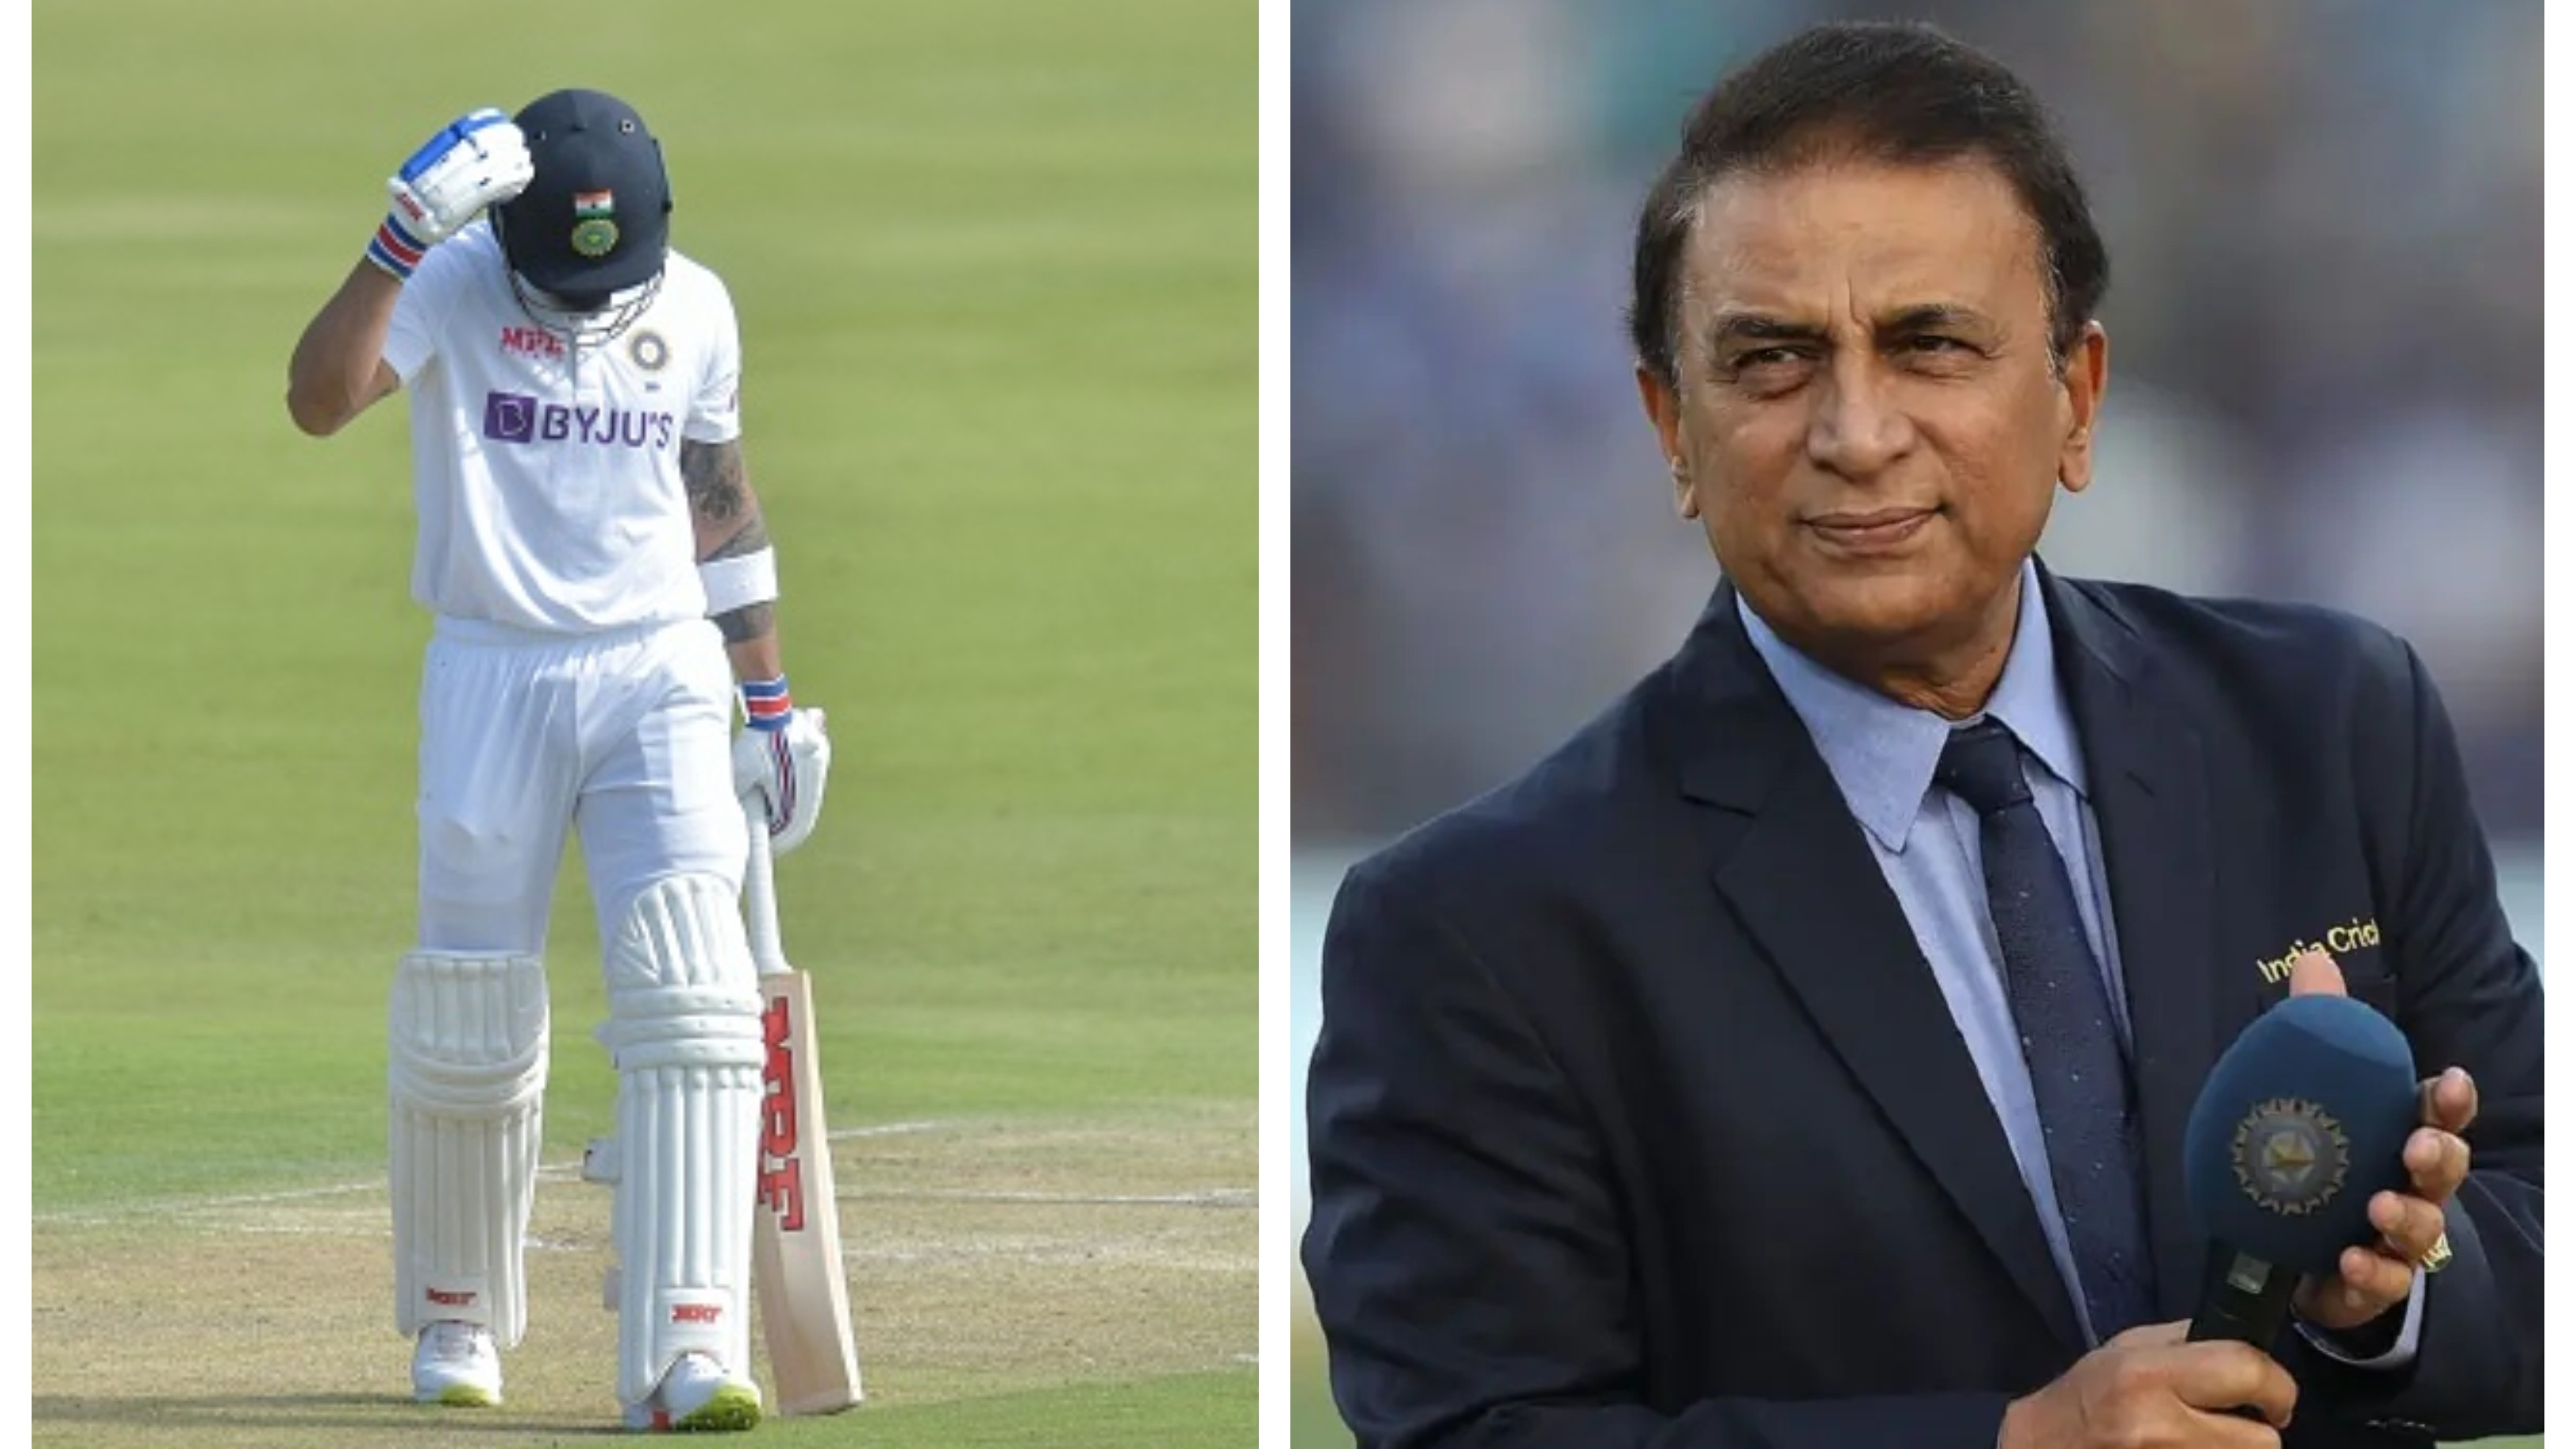 SA v IND 2021-22: “There's nothing wrong with his batting”, Sunil Gavaskar on Virat Kohli’s low scores